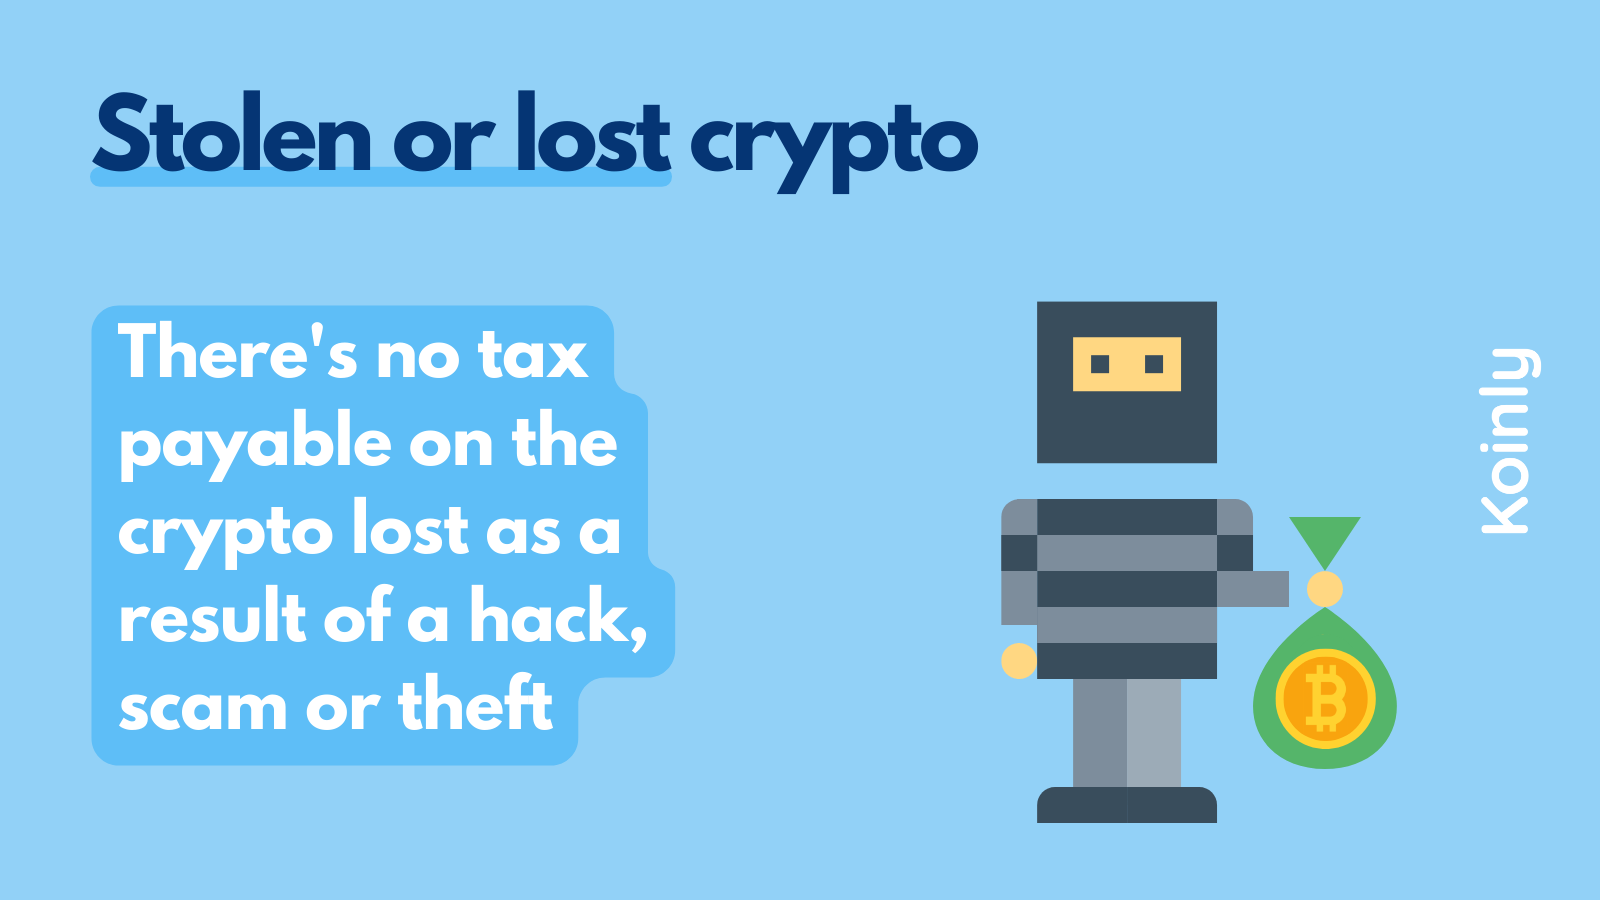 Lost or stolen crypto